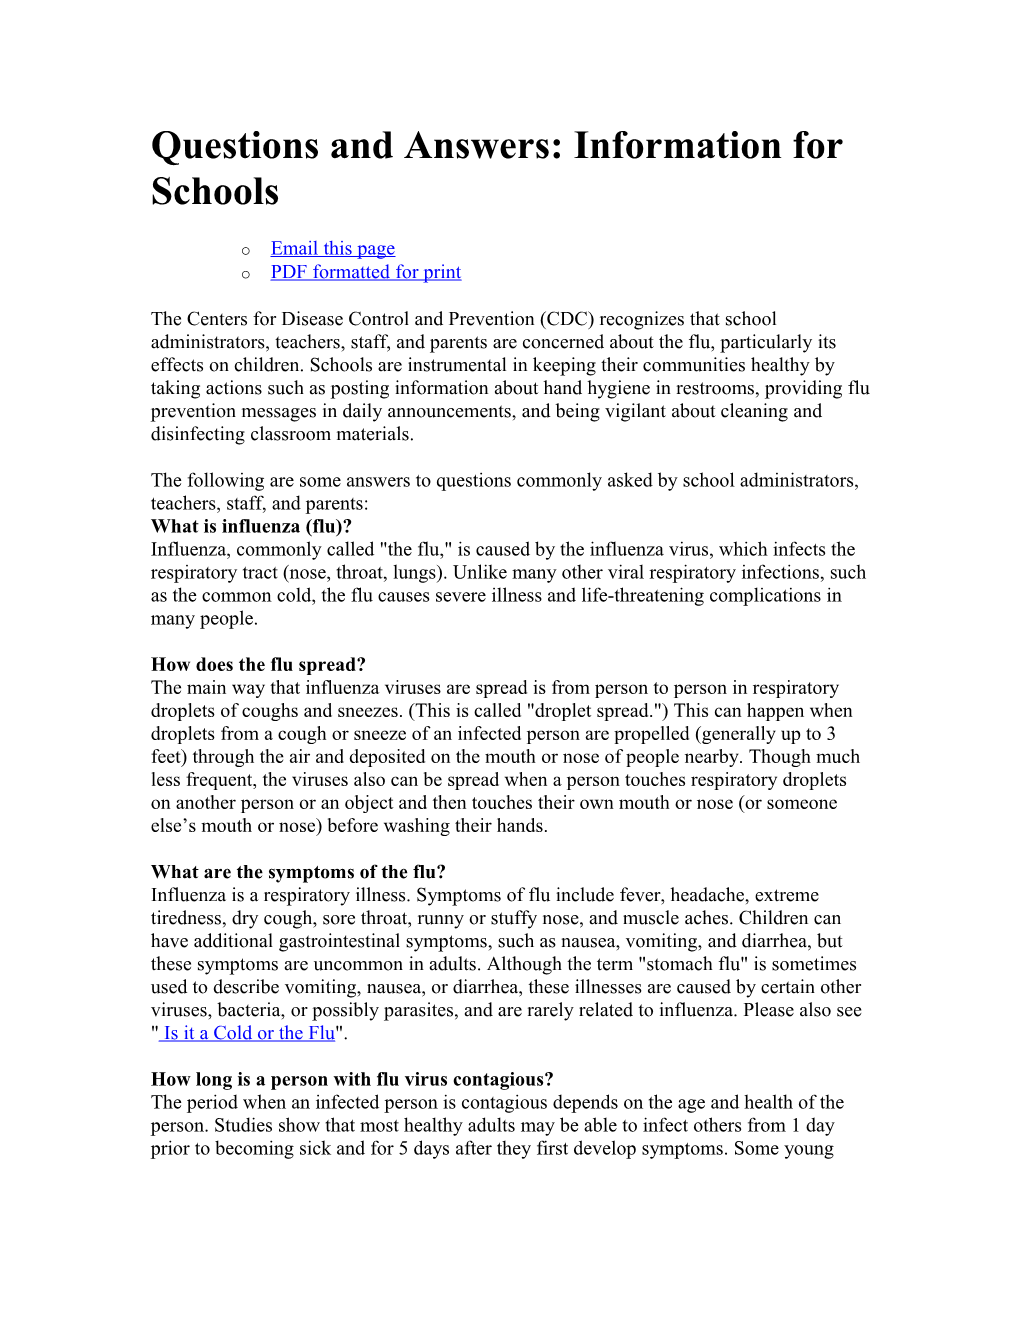 Questions and Answers: Information for Schools